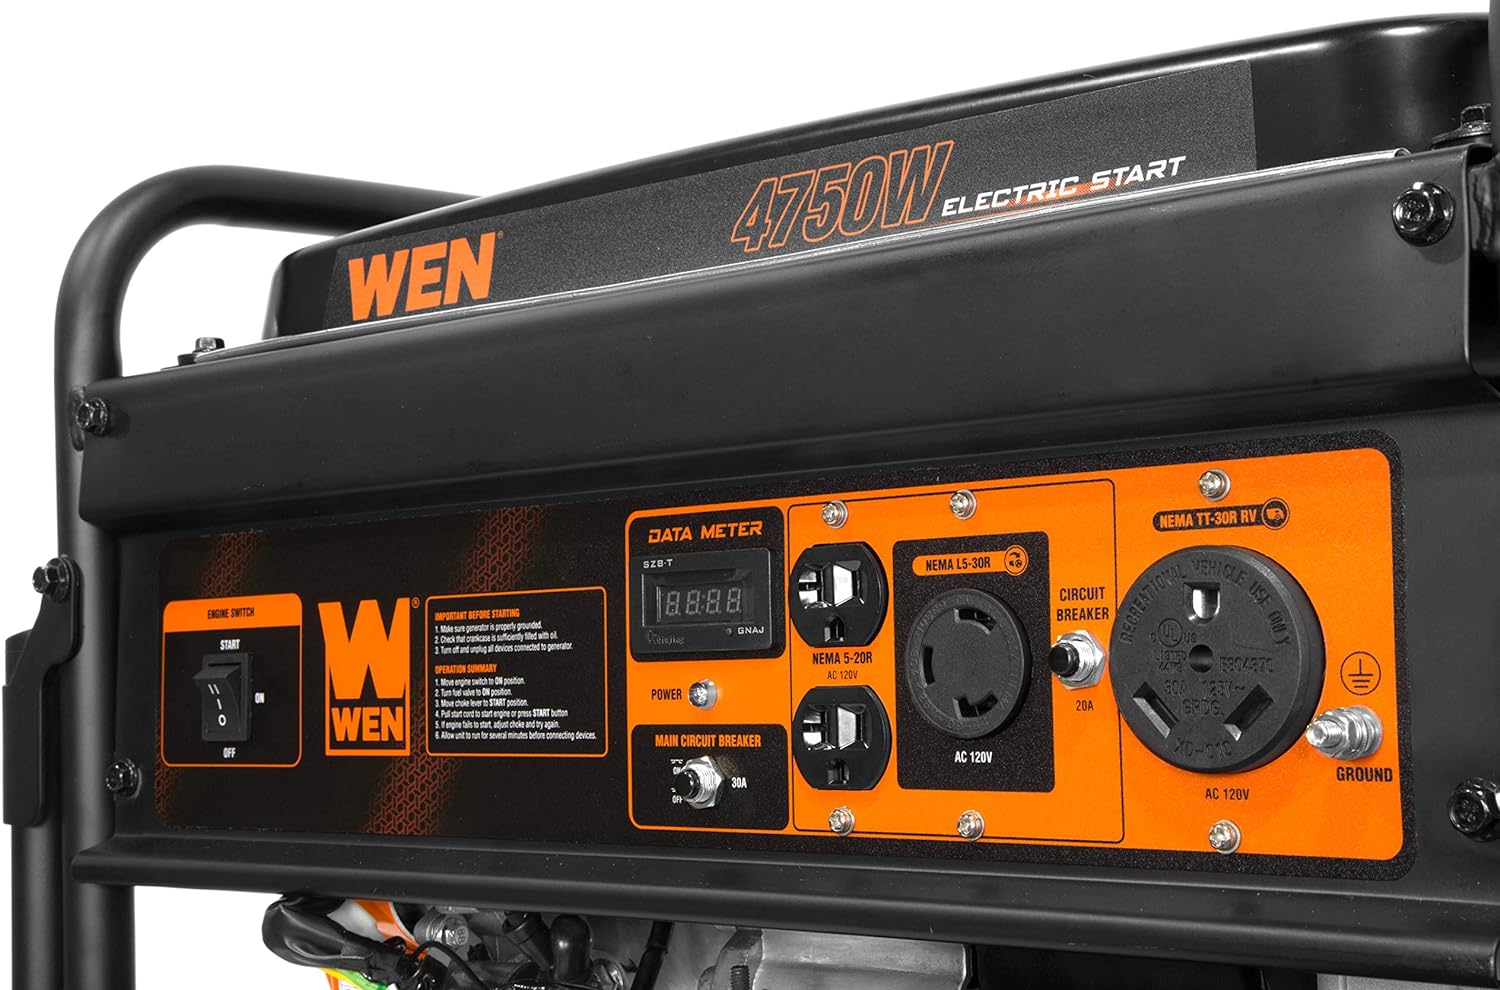 WEN 56475 4750-Watt Portable Generator with Electric Start and Wheel Kit, Yellow and Black - WEN 56475 Portable Generator Review